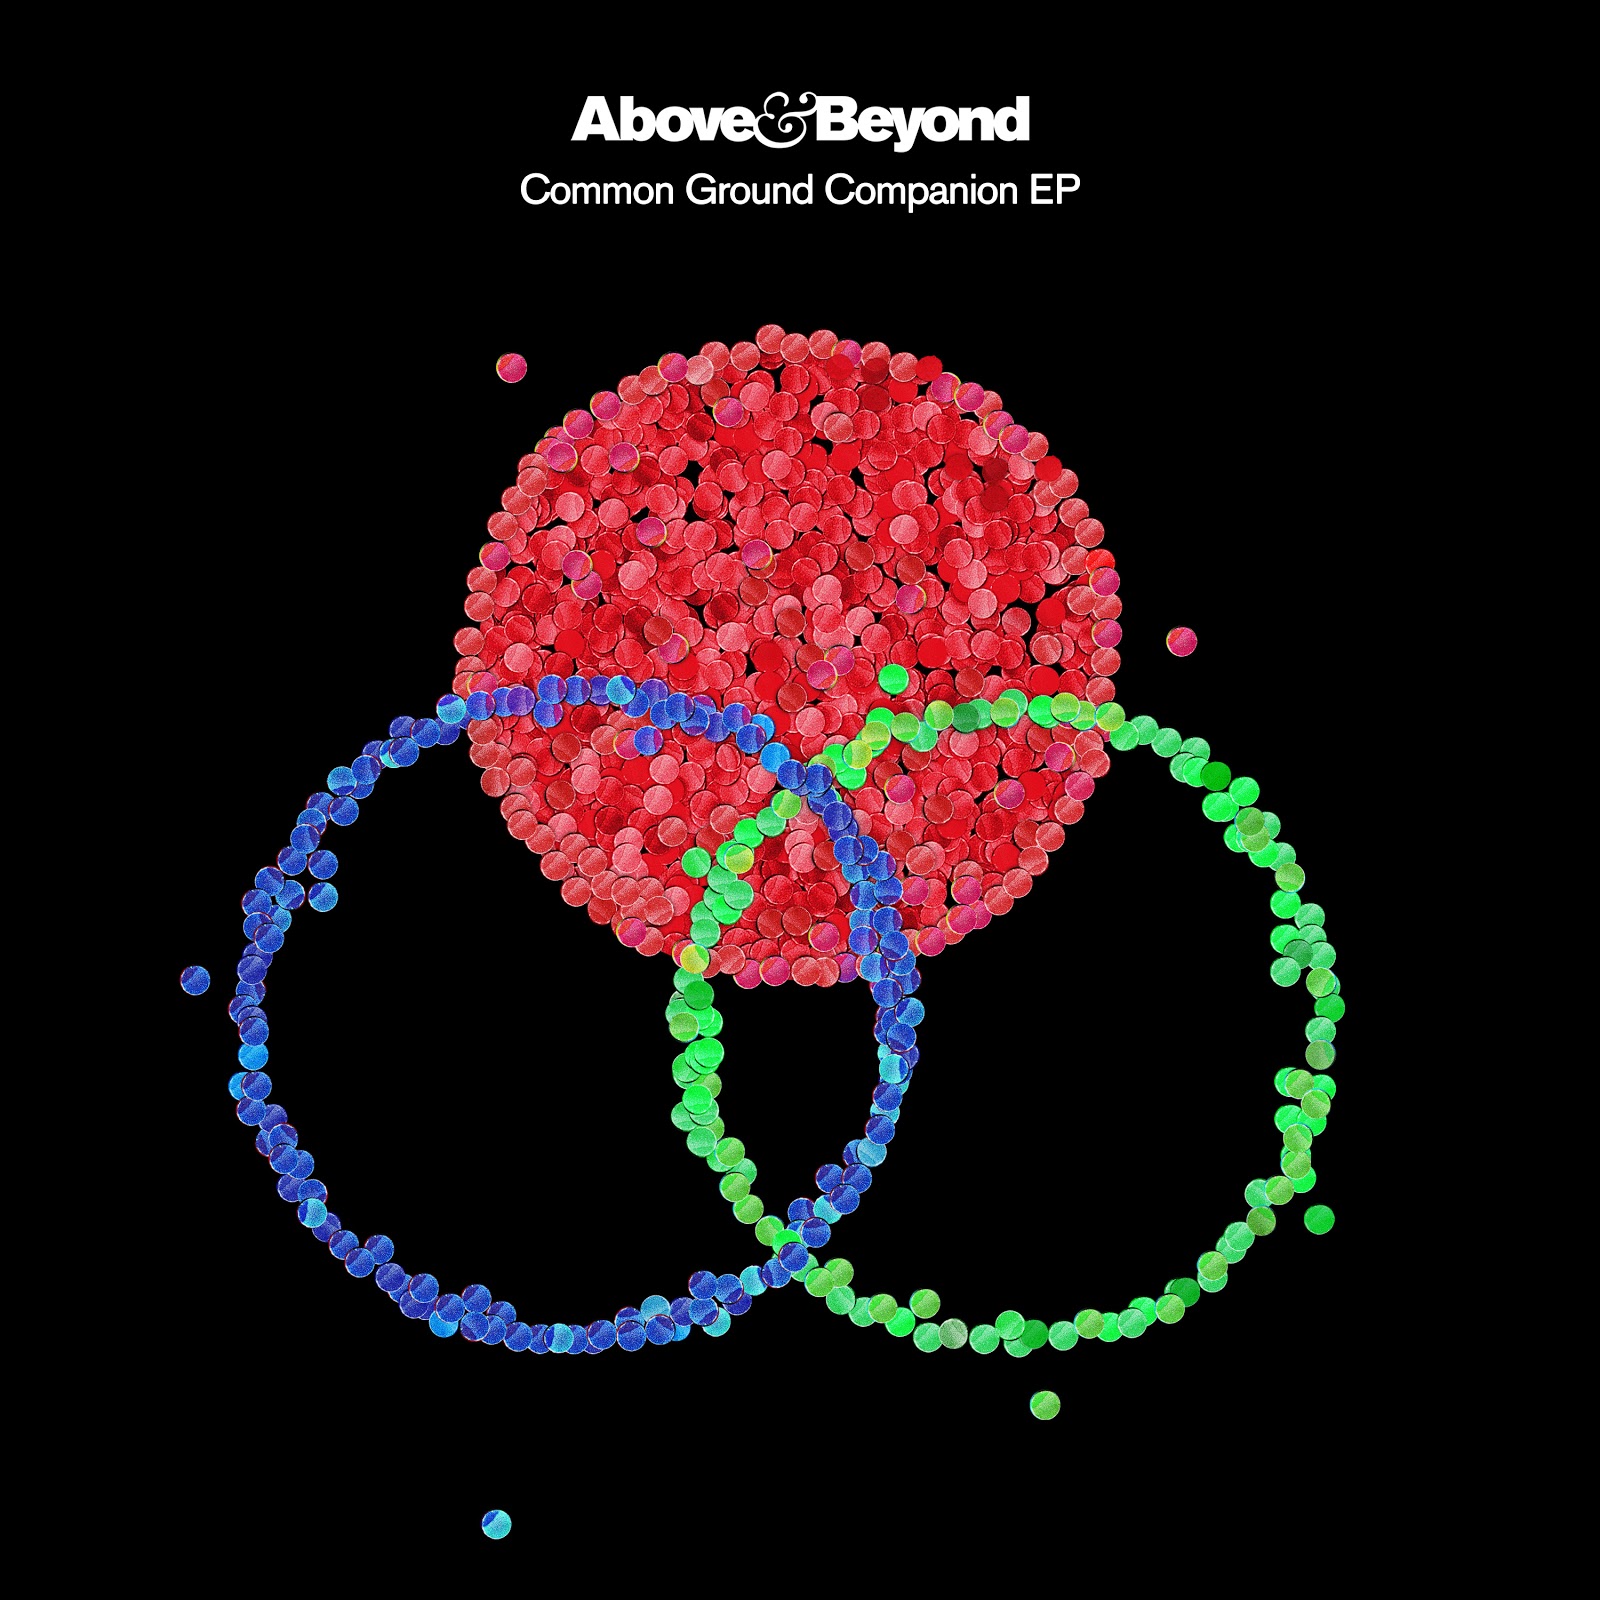 Above and Beyond presents Common Ground Companion EP on Anjunabeats